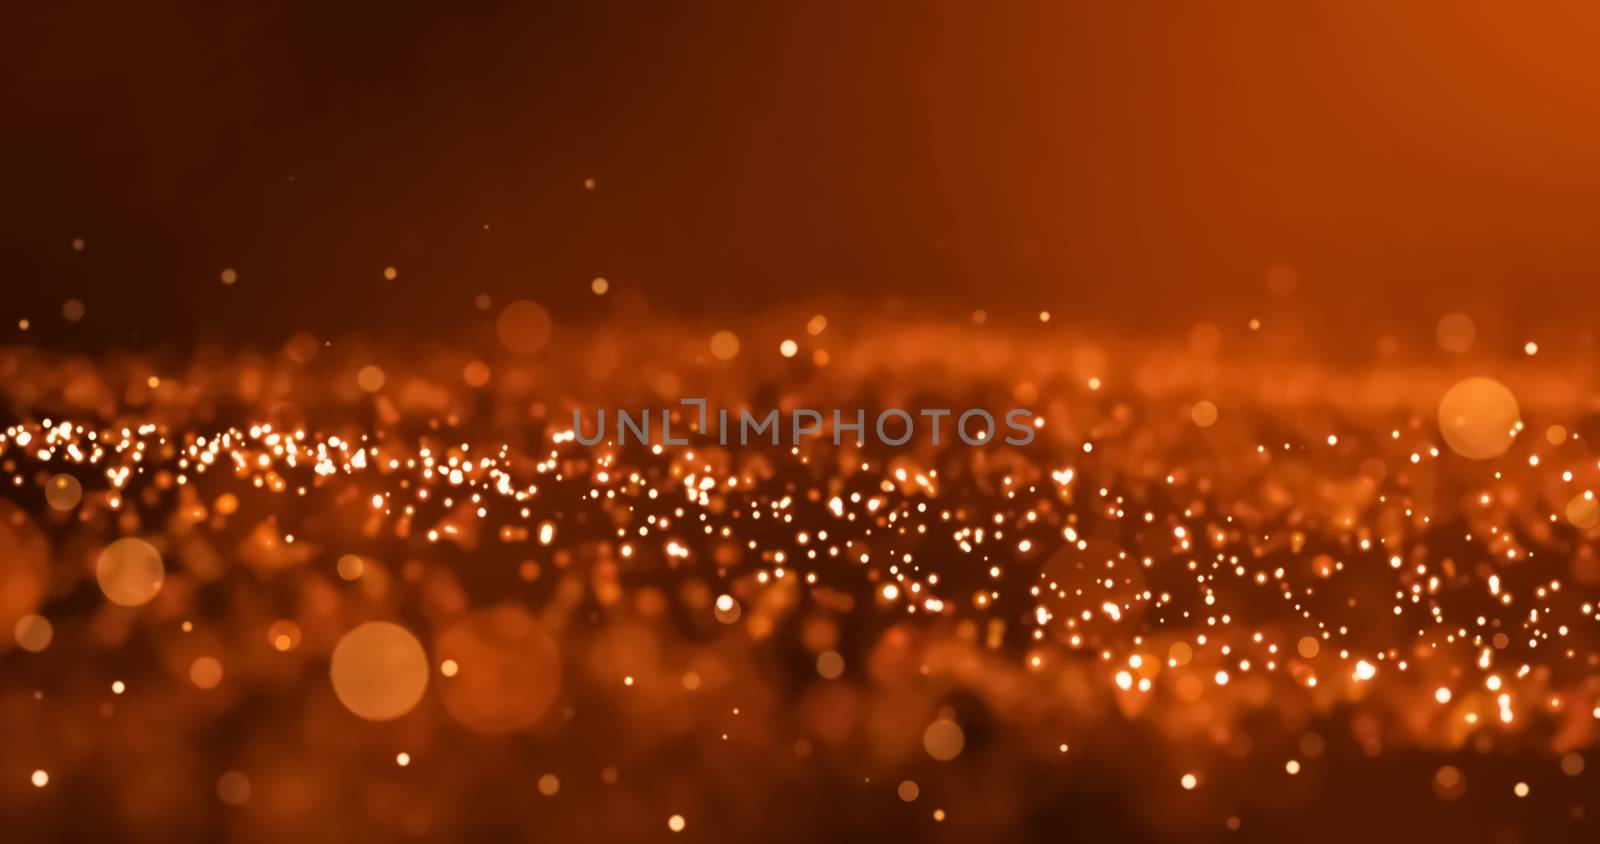 Gold glitter abstract background with shiny particles. Elegant design with bokeh effect.